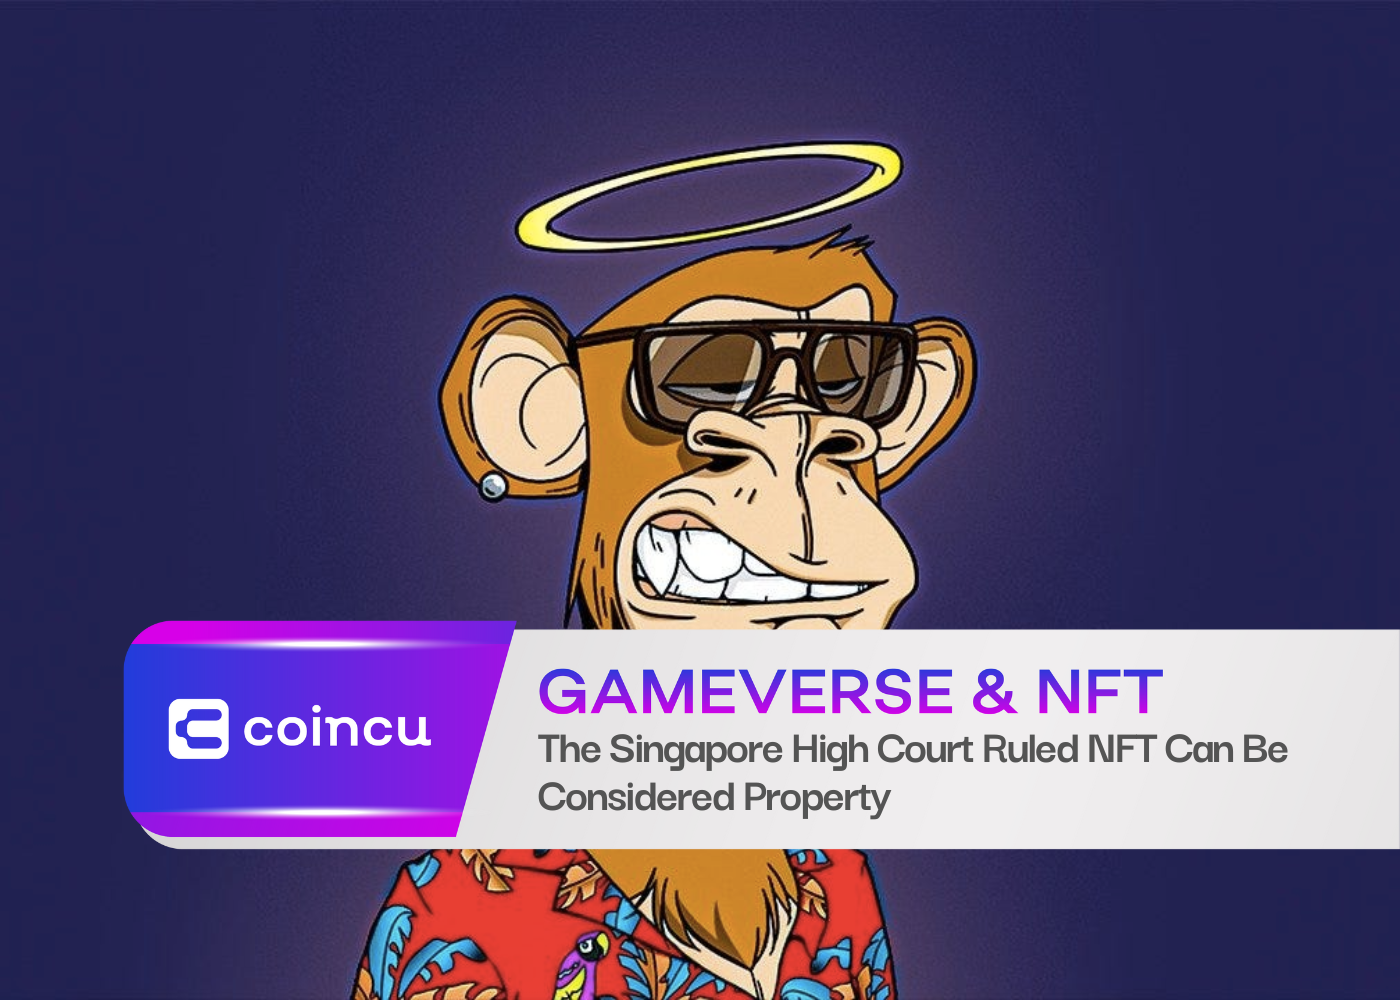 The Singapore High Court Ruled NFT Can Be Considered Property